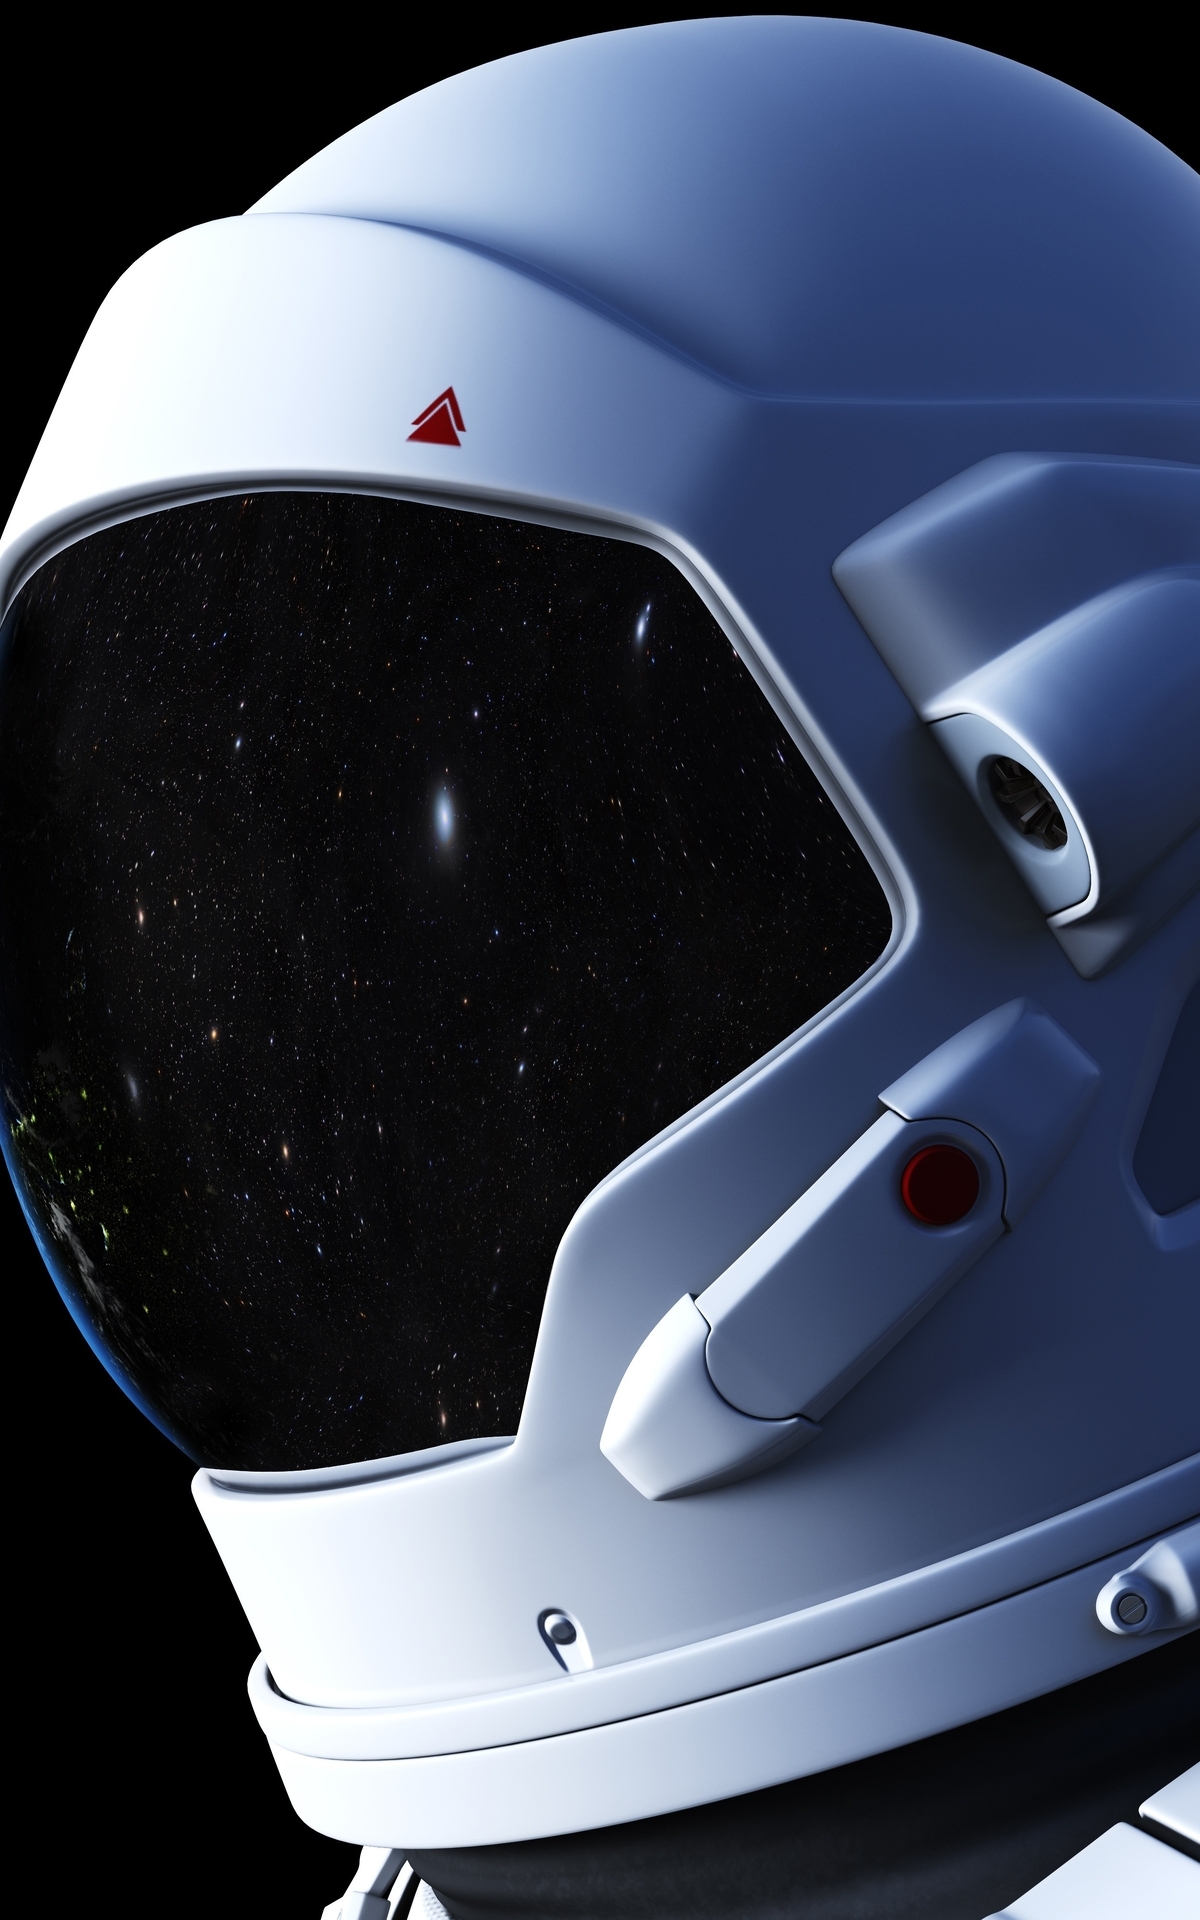 Image: Astronaut, spacesuit, space, planet, Earth, light, reflection, stars